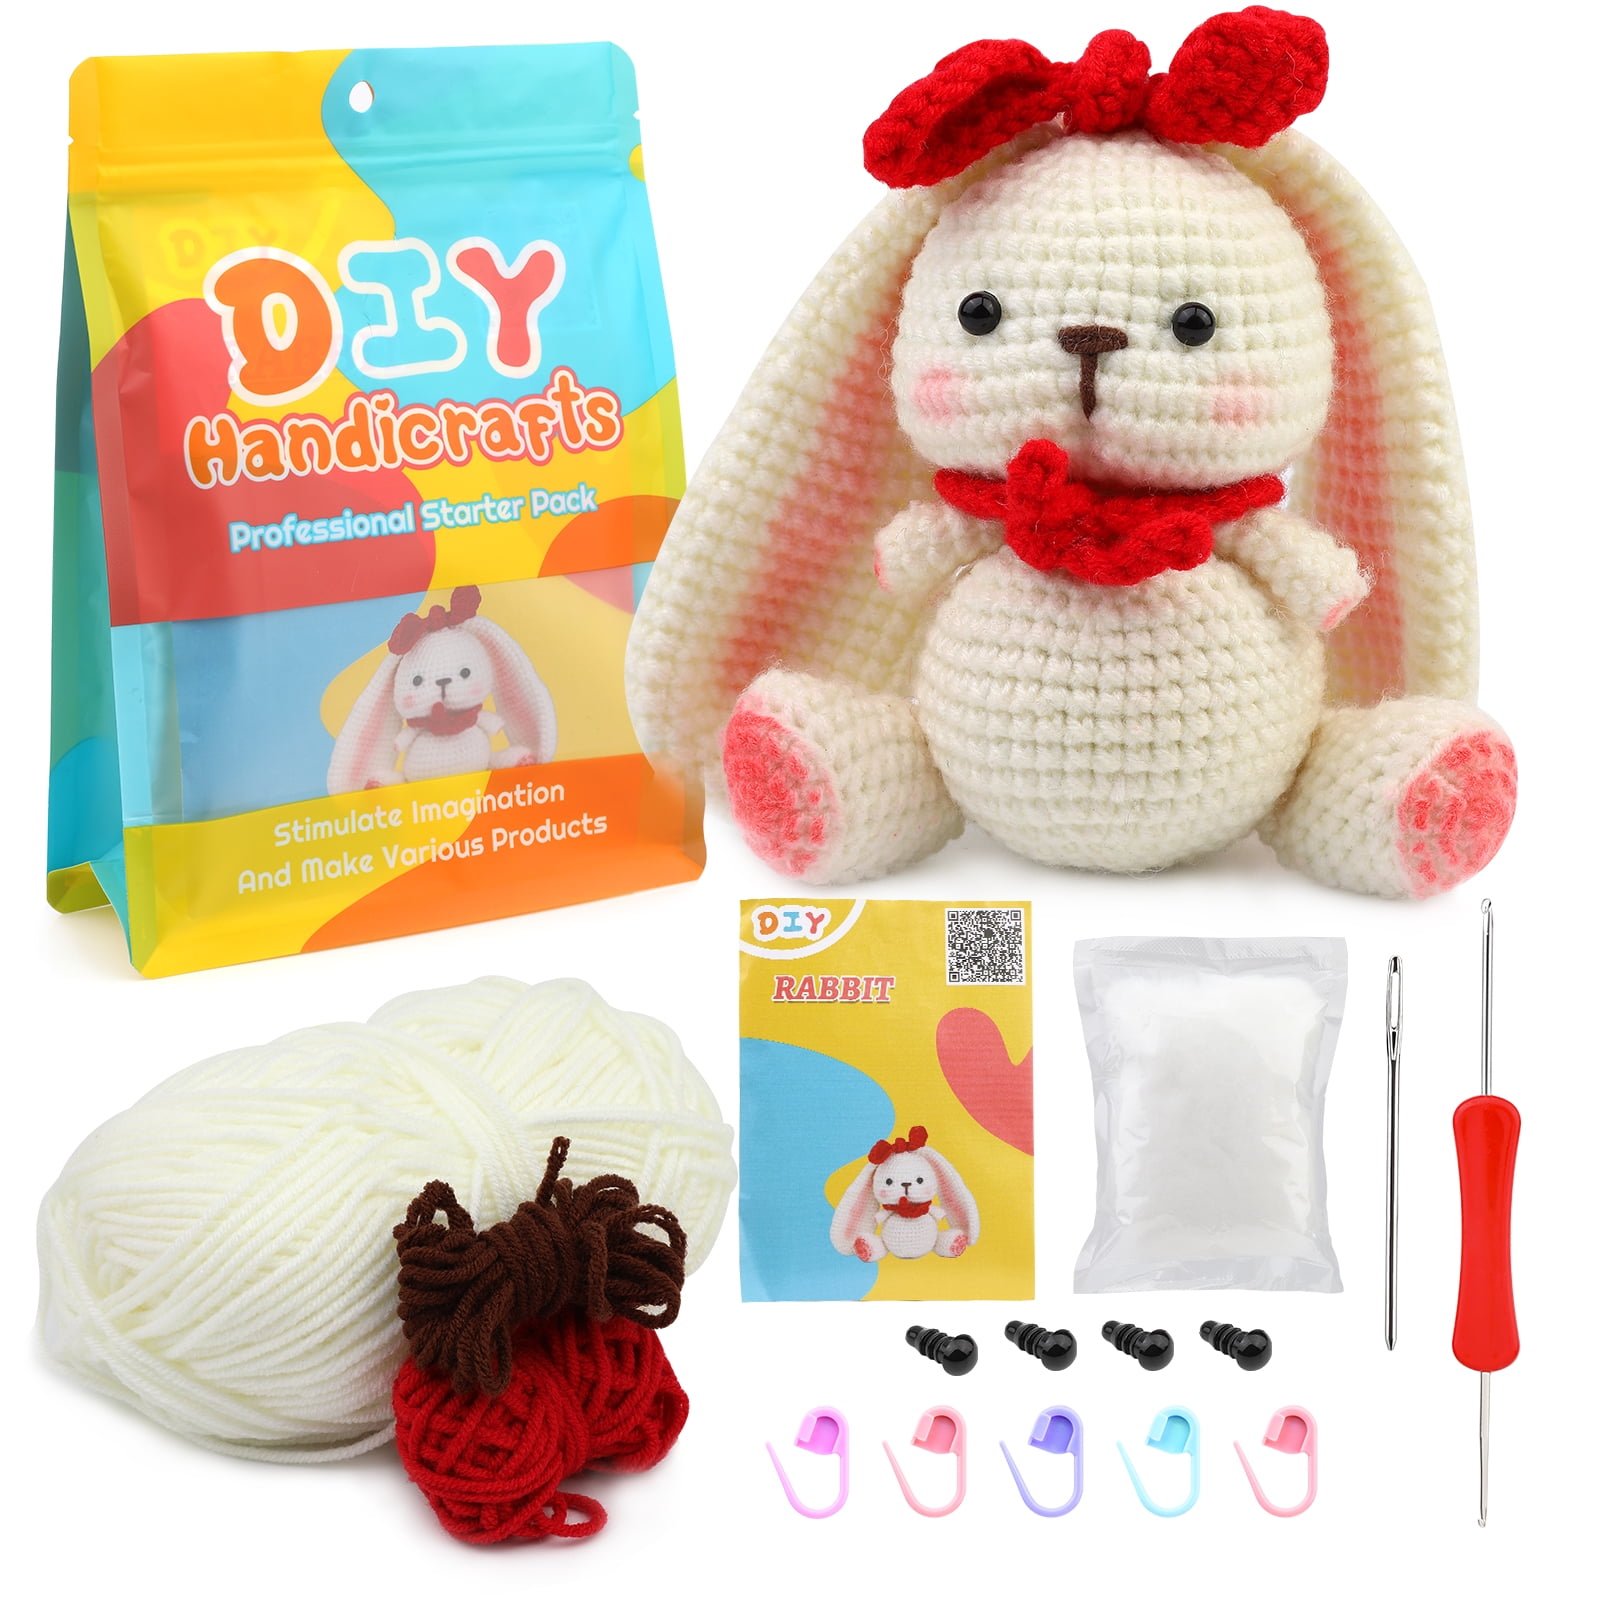  Wayyosen Crochet Kit for Beginners with Crochet Yarn - Beginner  Crochet Animals Kit for Adults with Step-by-Step Video Tutorials,Learn to  Crochet Kits Dog,DIY Craft Gift